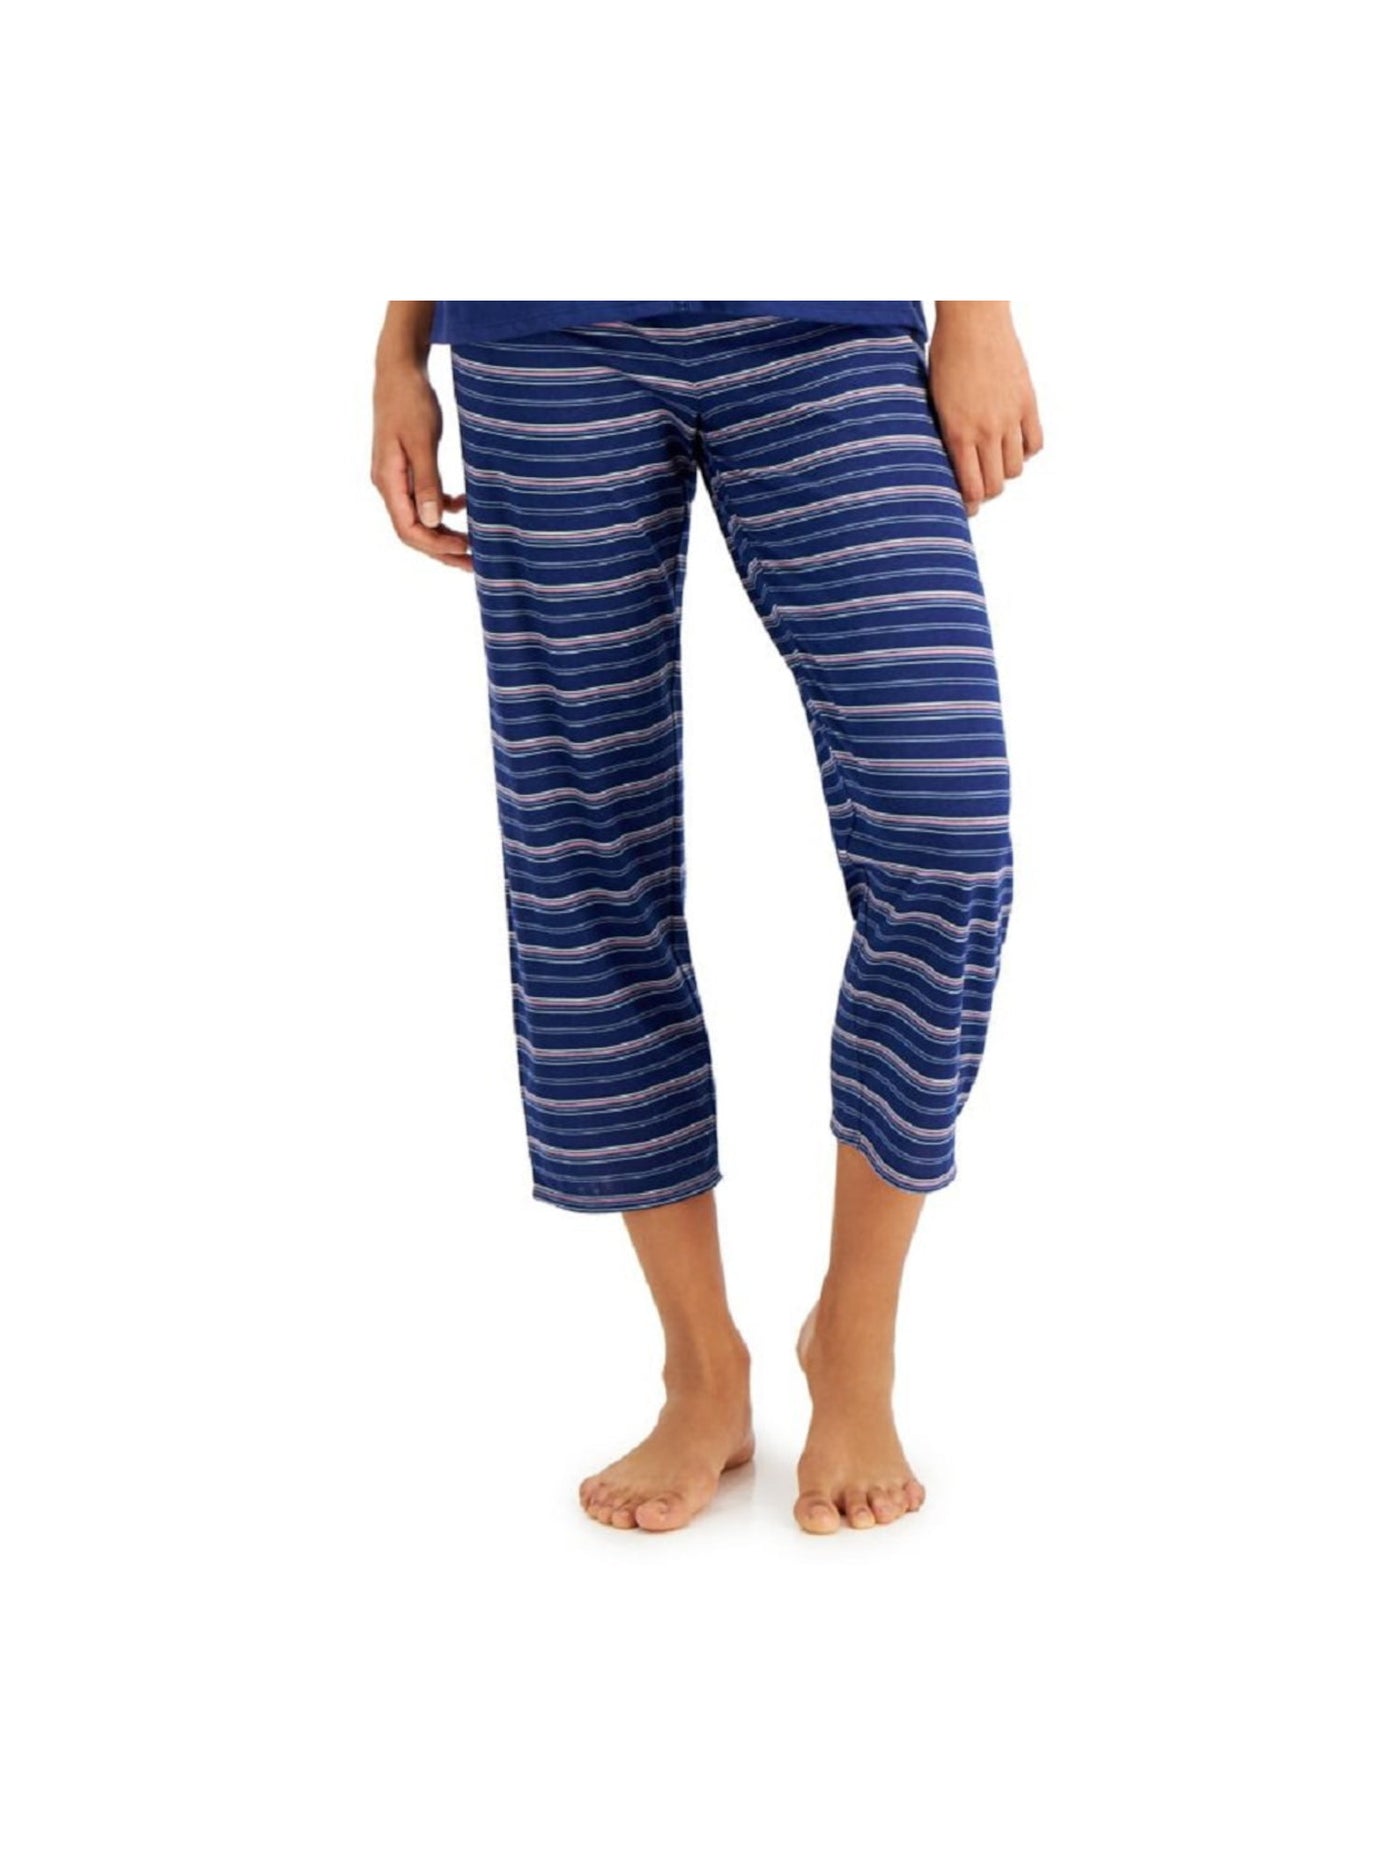 CHARTER CLUB Intimates Navy Cropped Striped Sleep Pants S